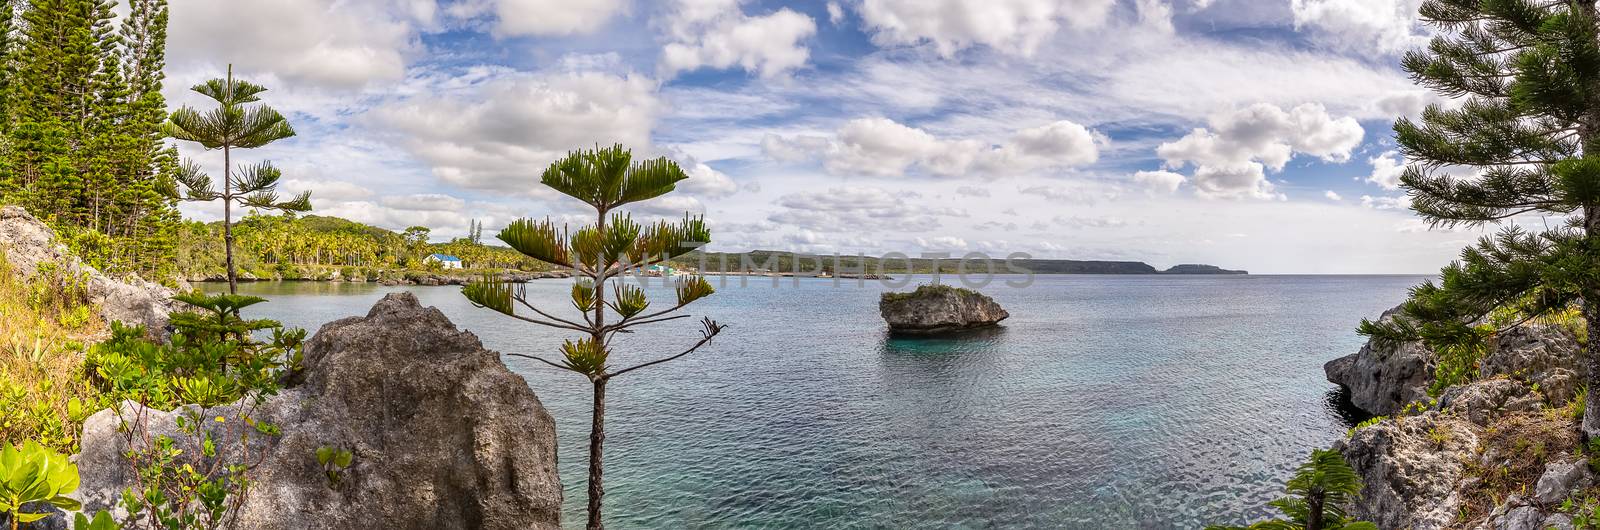 Amazing panoramic shot of Island of Mare in New Caledonia. Lone massive cliff in the water next to the island. Trees and rocks in the foreground. Blue cloudy sky as a background.